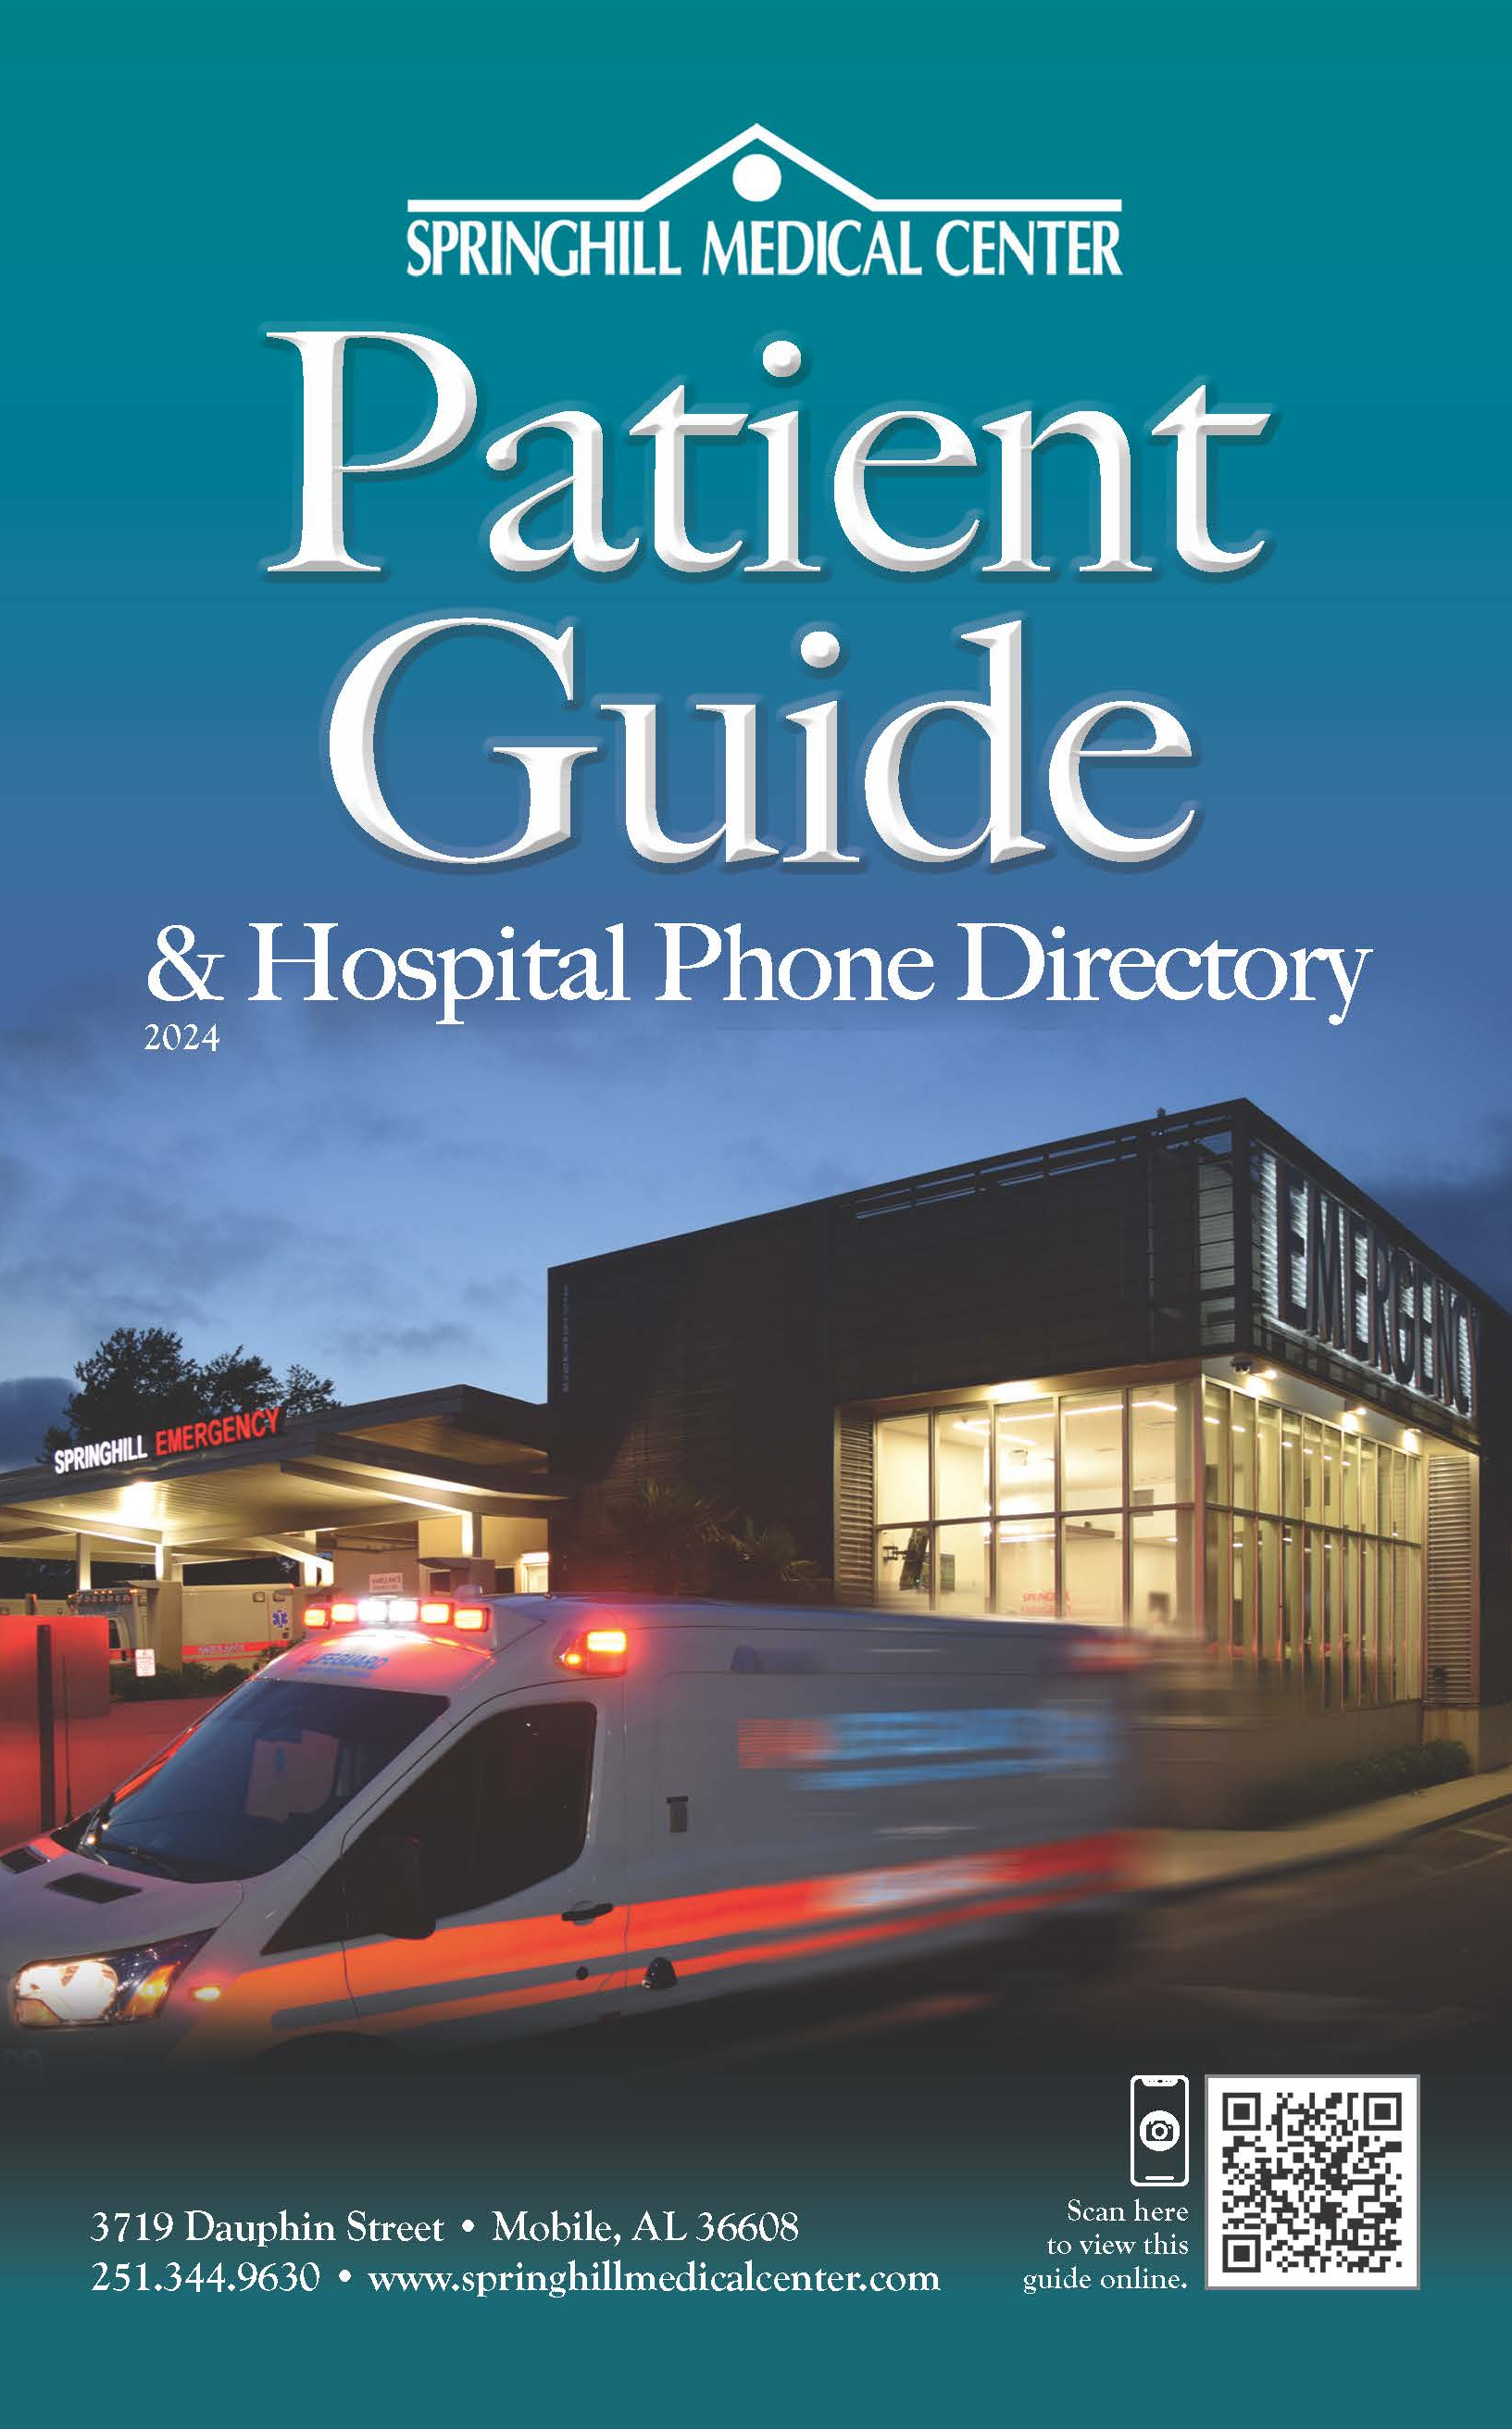 Springhill Medical Center Patient Guide